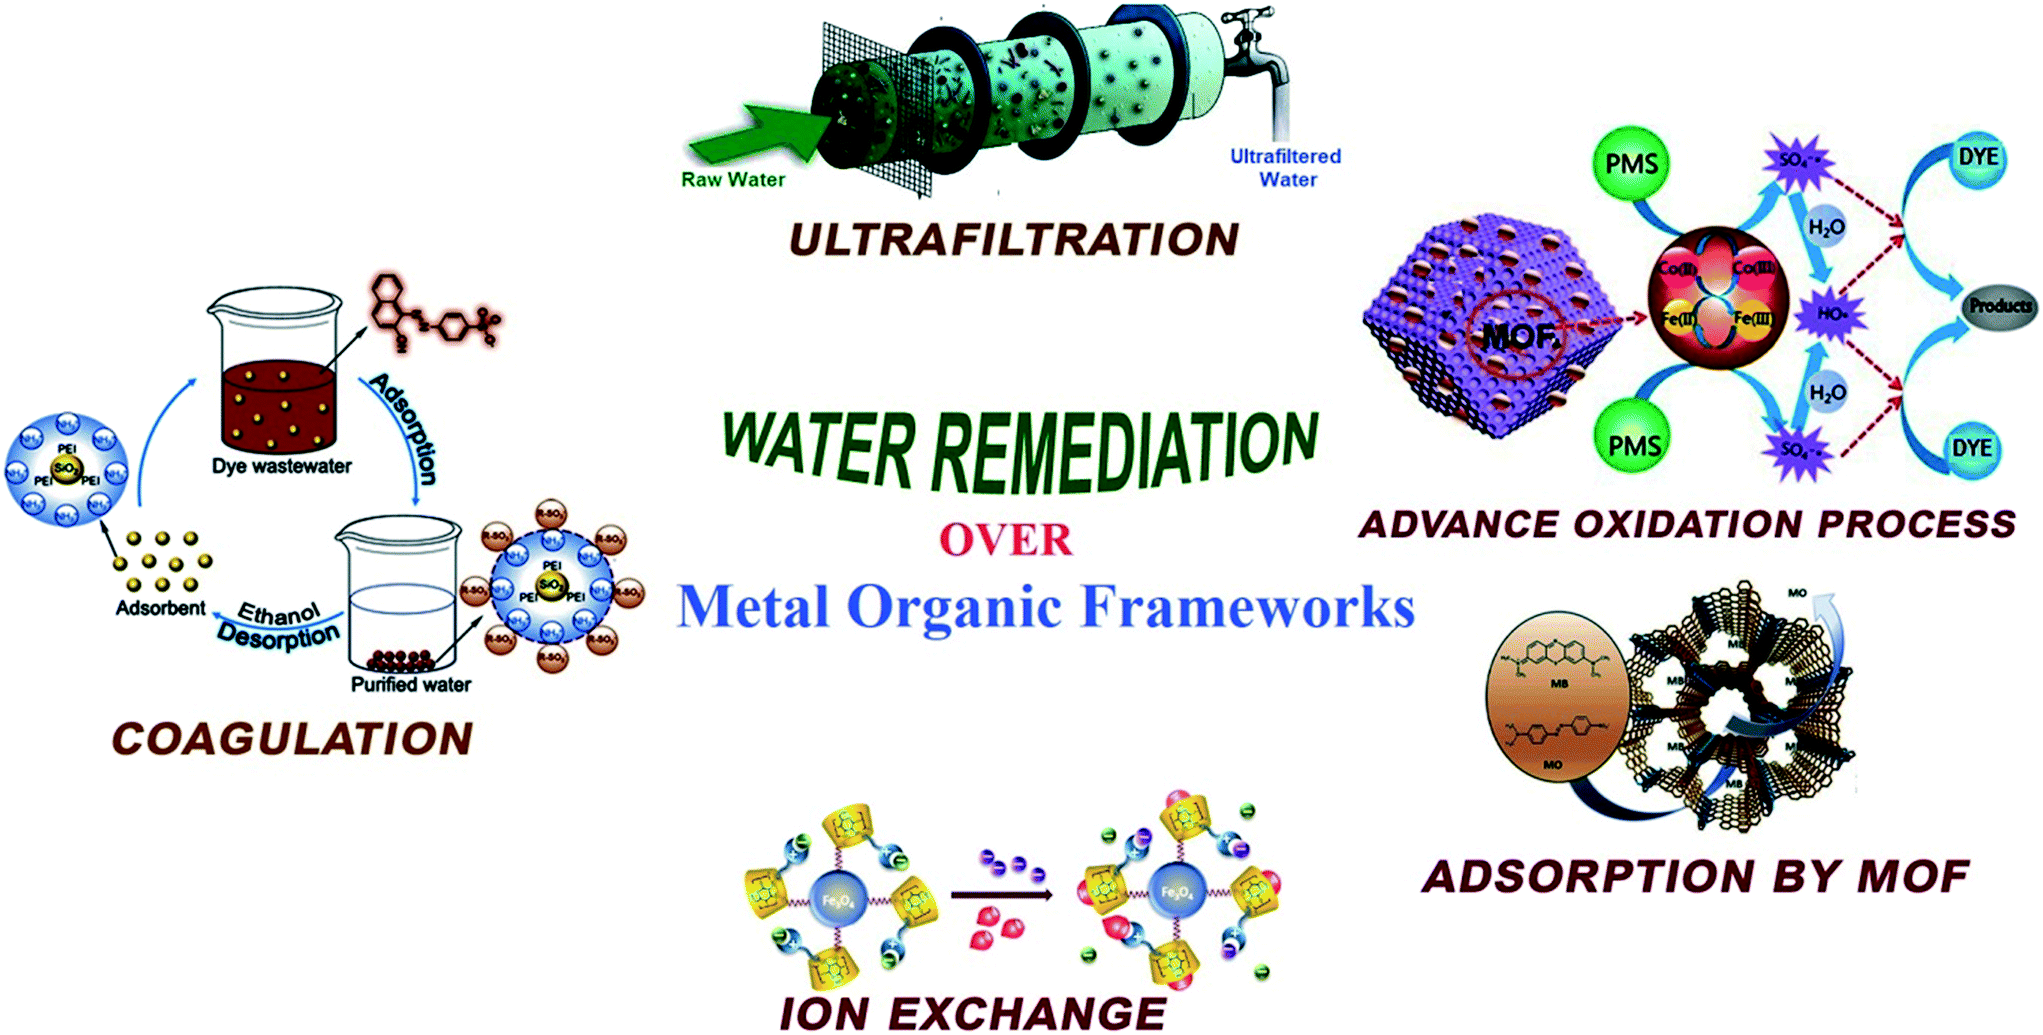 Syntheses Design Strategies And Photocatalytic Charge Dynamics Of Metal Organic Frameworks Mofs A Catalyzed Photo Degradation Approach Towards Organic Dyes Catalysis Science Technology Rsc Publishing